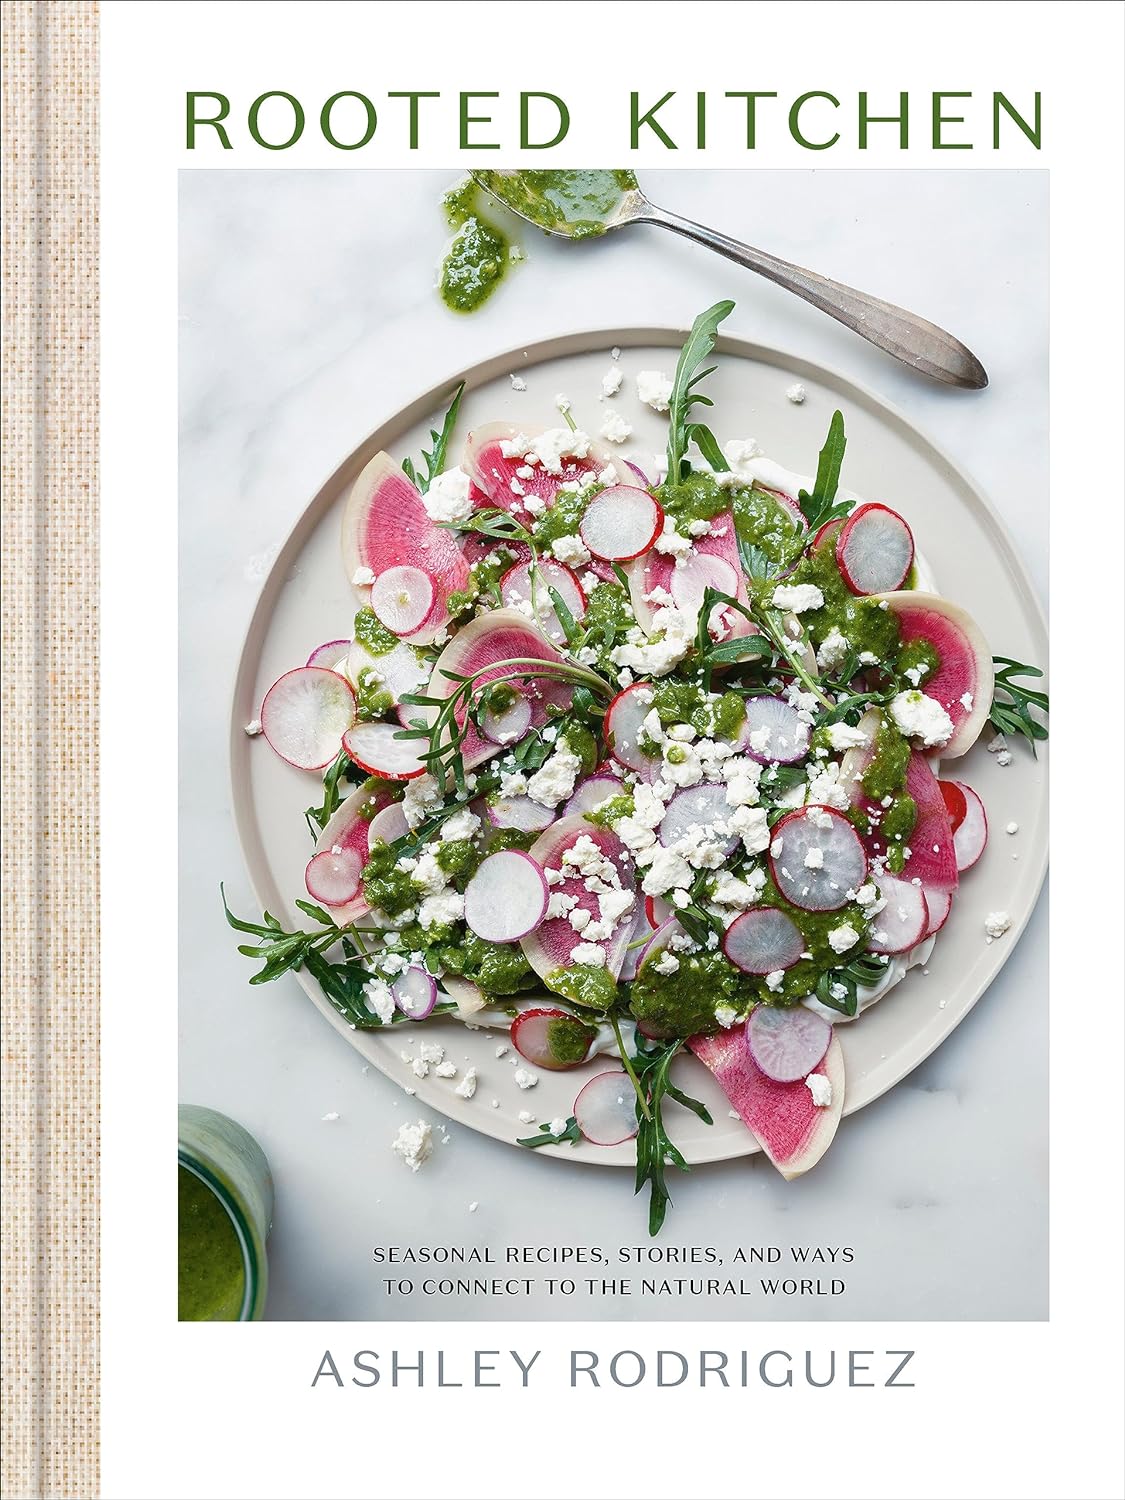 Rooted Kitchen: Seasonal Recipes, Stories, and Ways to Connect with the Natural World (Ashley Rodriguez) *Signed*